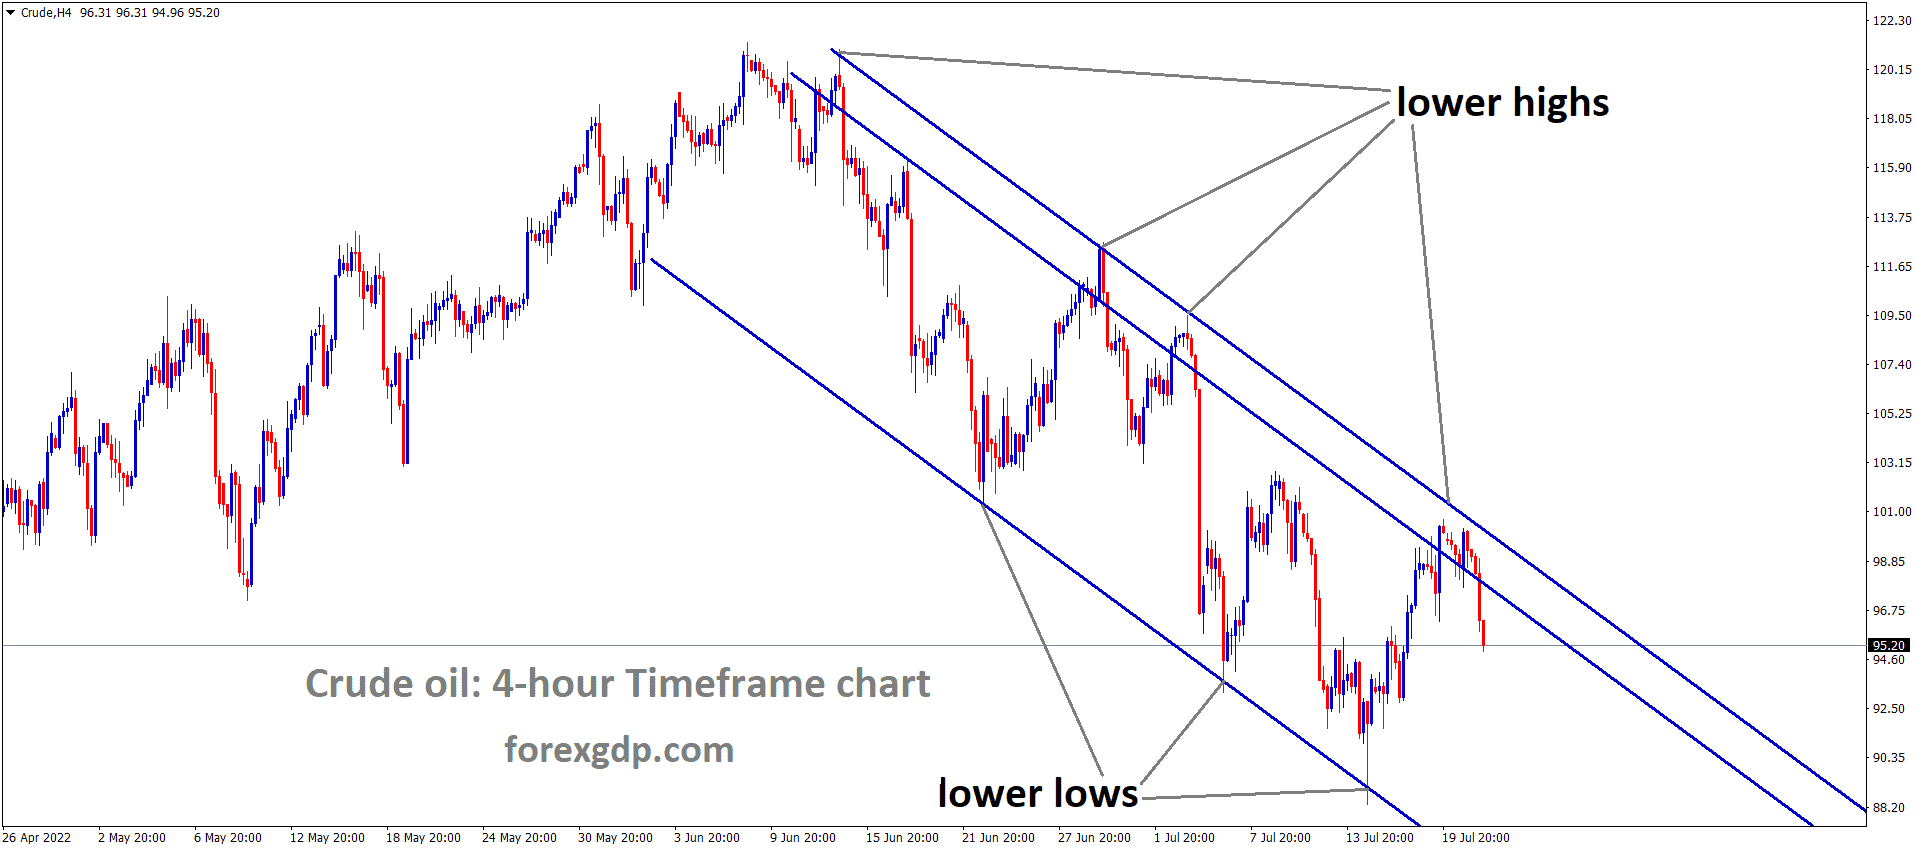 Crude Oil is moving in the Descending channel and the market has fallen from the Lower high area of the channel